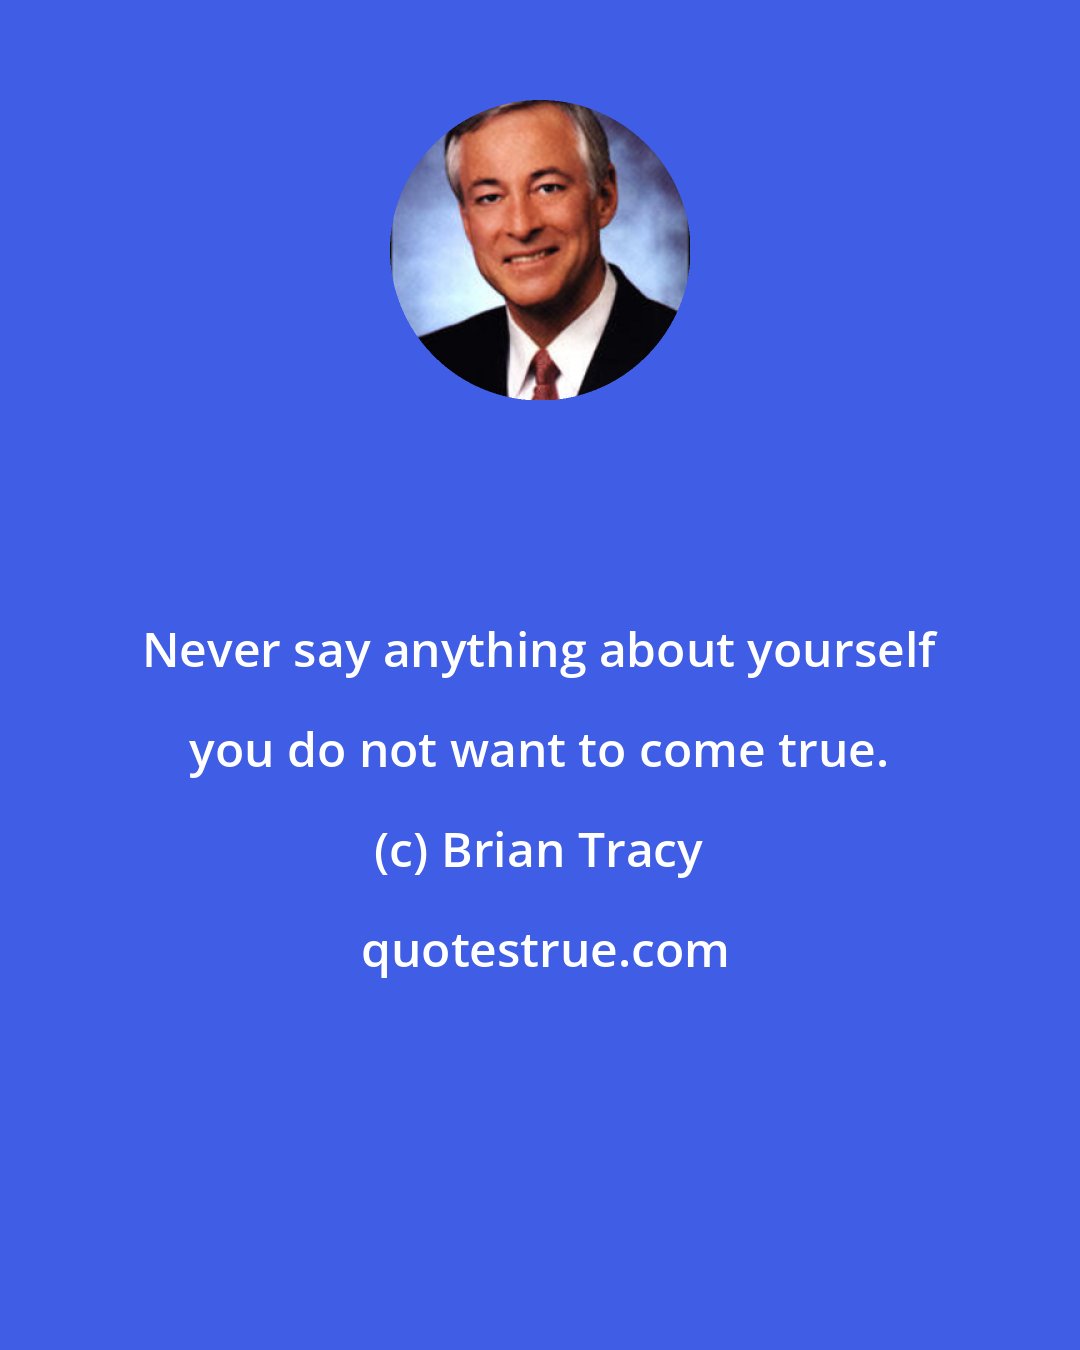 Brian Tracy: Never say anything about yourself you do not want to come true.